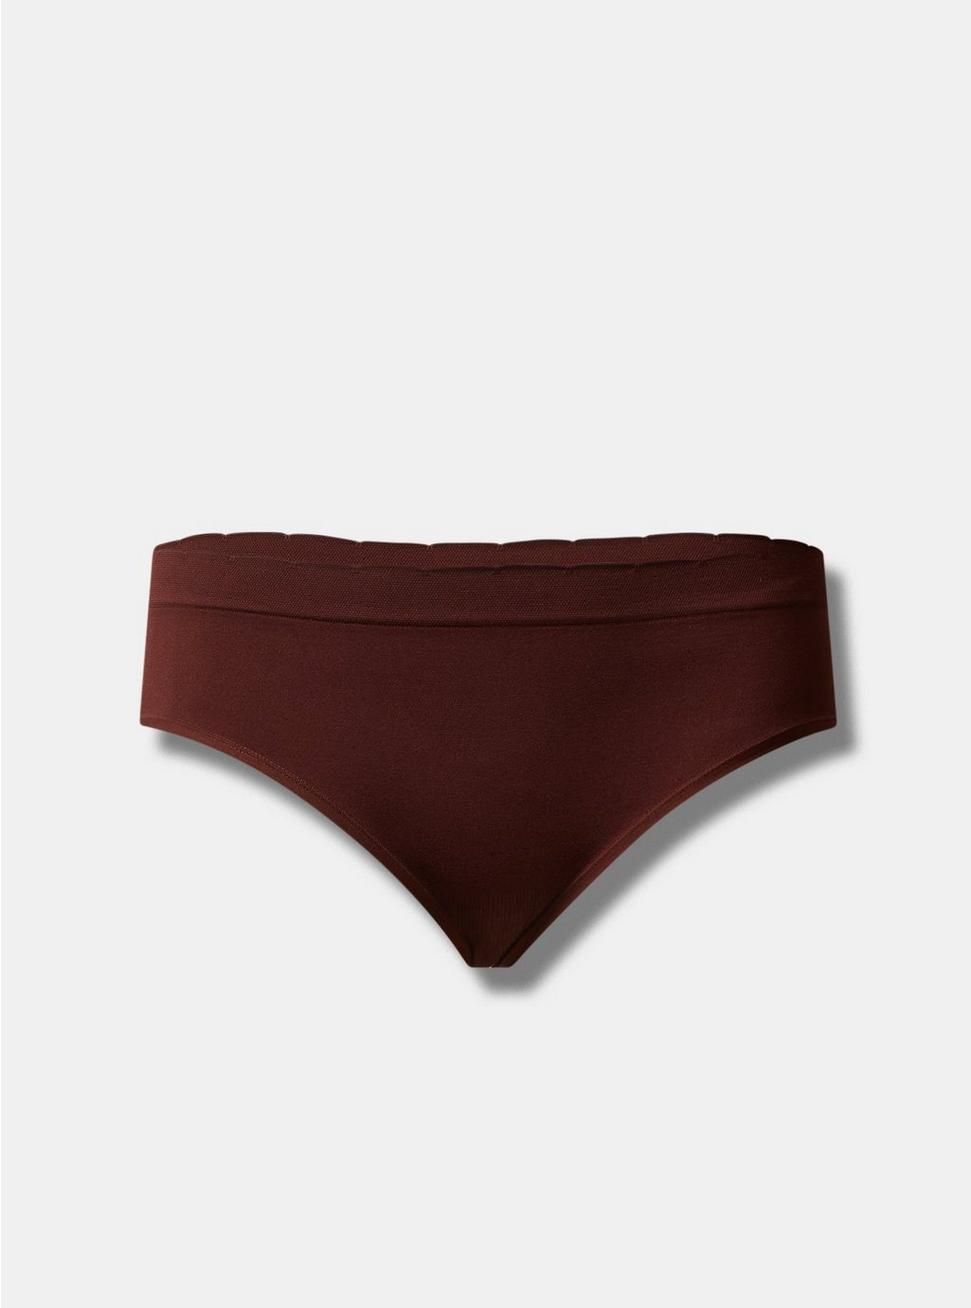 Plus Size Seamless Smooth Mid-Rise Hipster Panty, COCOA BROWN, hi-res